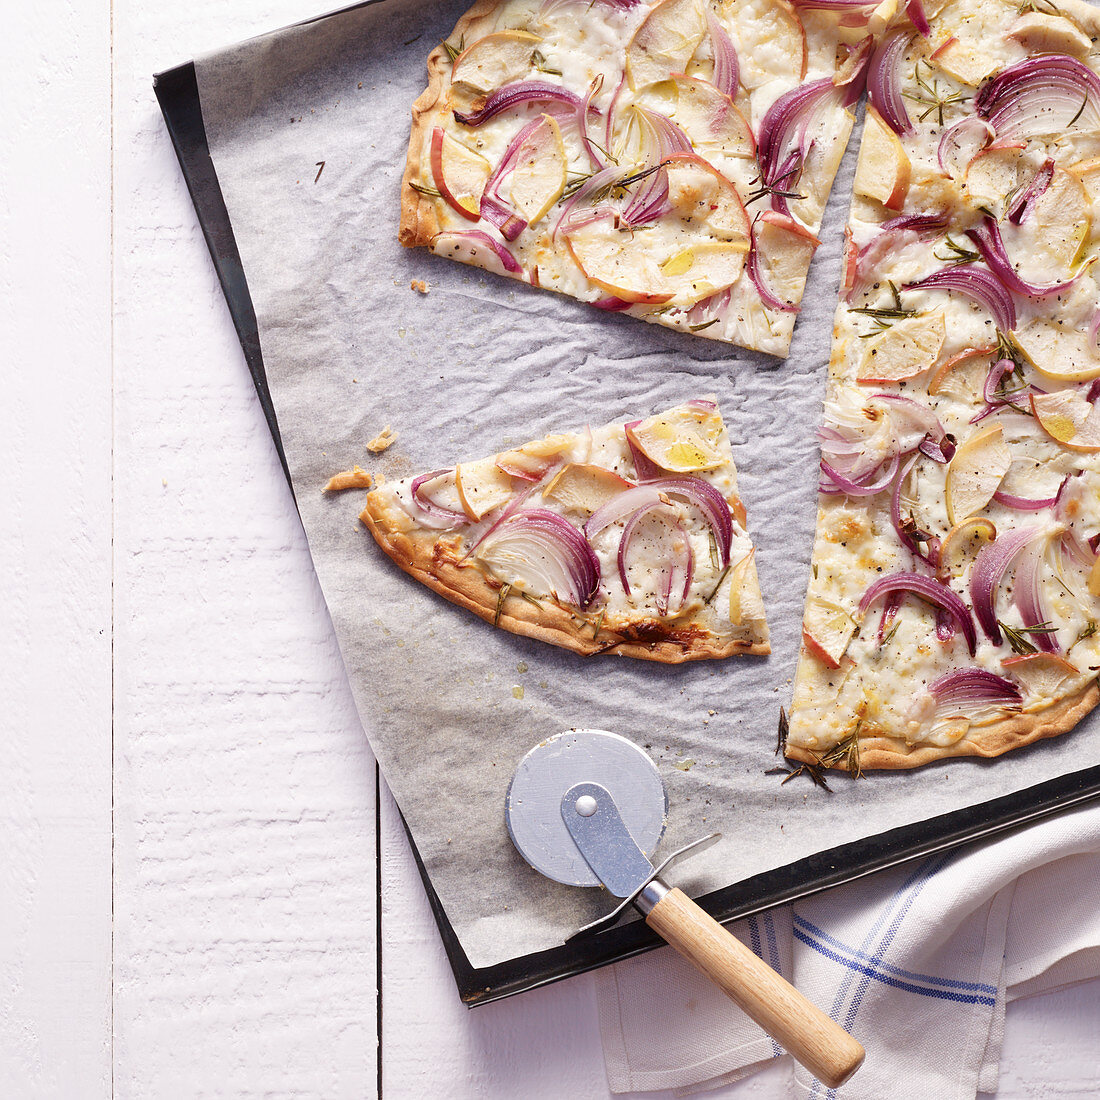 Tarte flambée with apple, onions and goat’s cheese